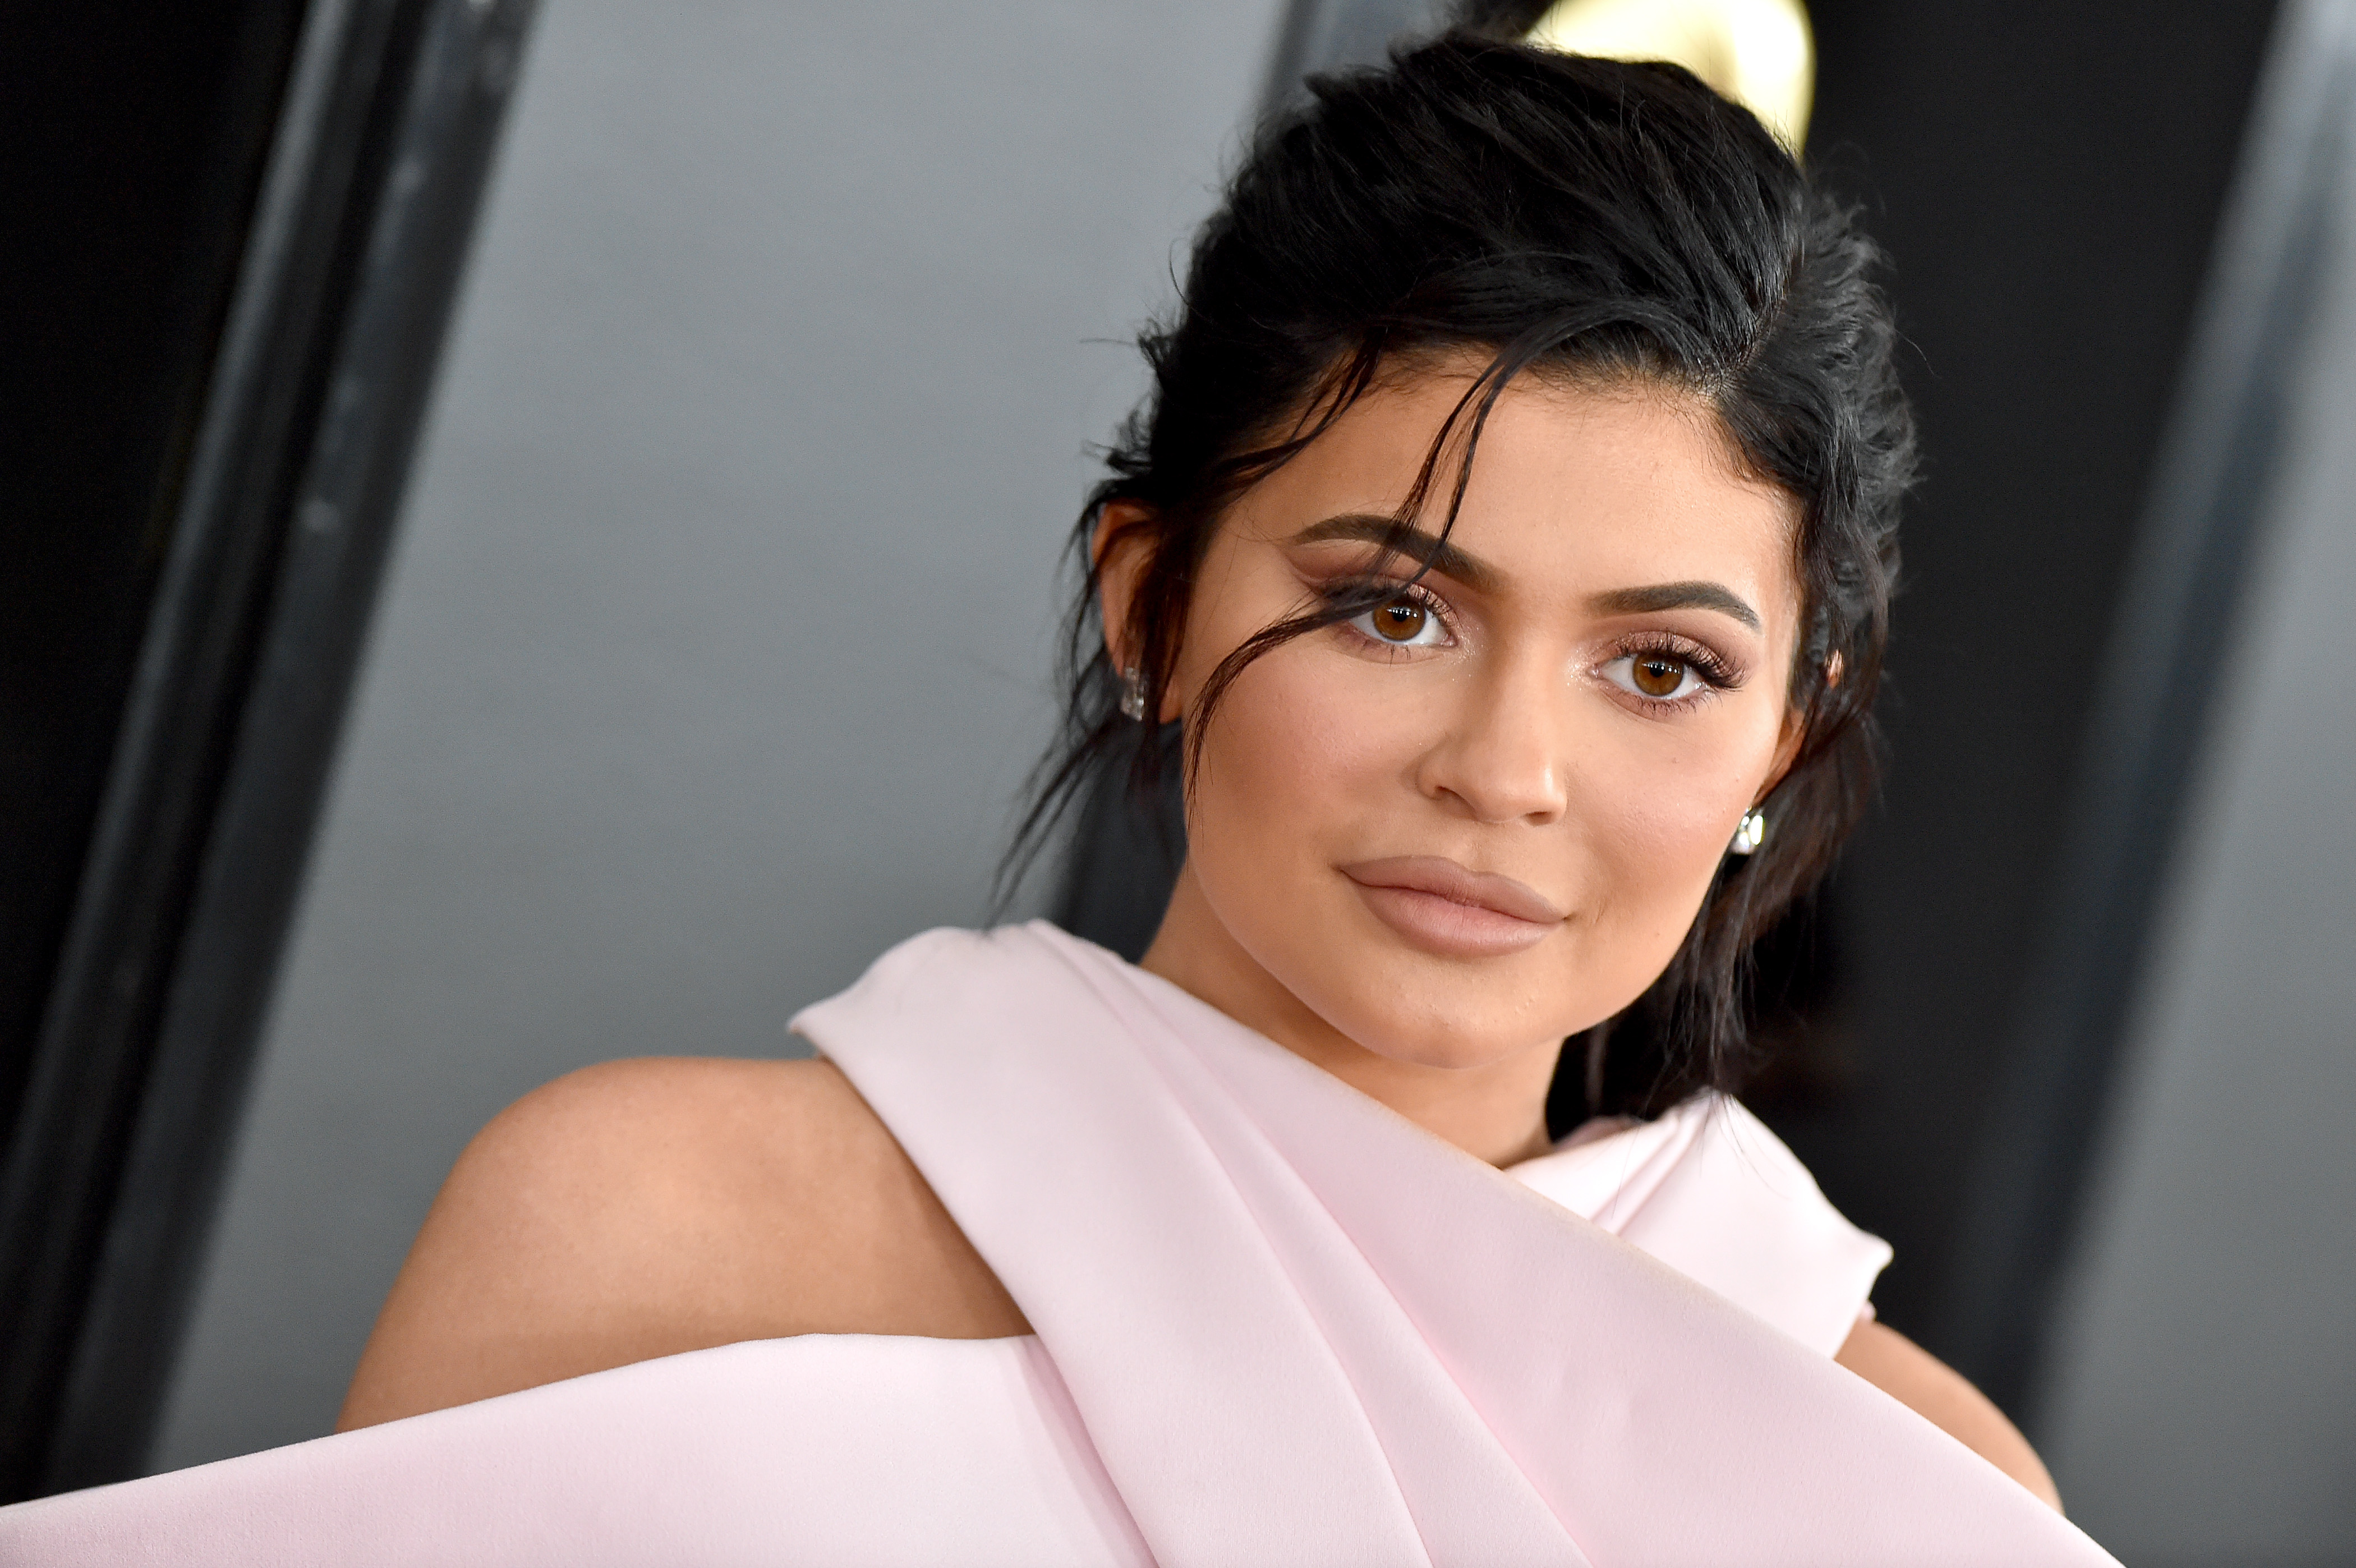 4200px x 2795px - Kylie Jenner named youngest self-made billionaire by Forbes - National |  Globalnews.ca